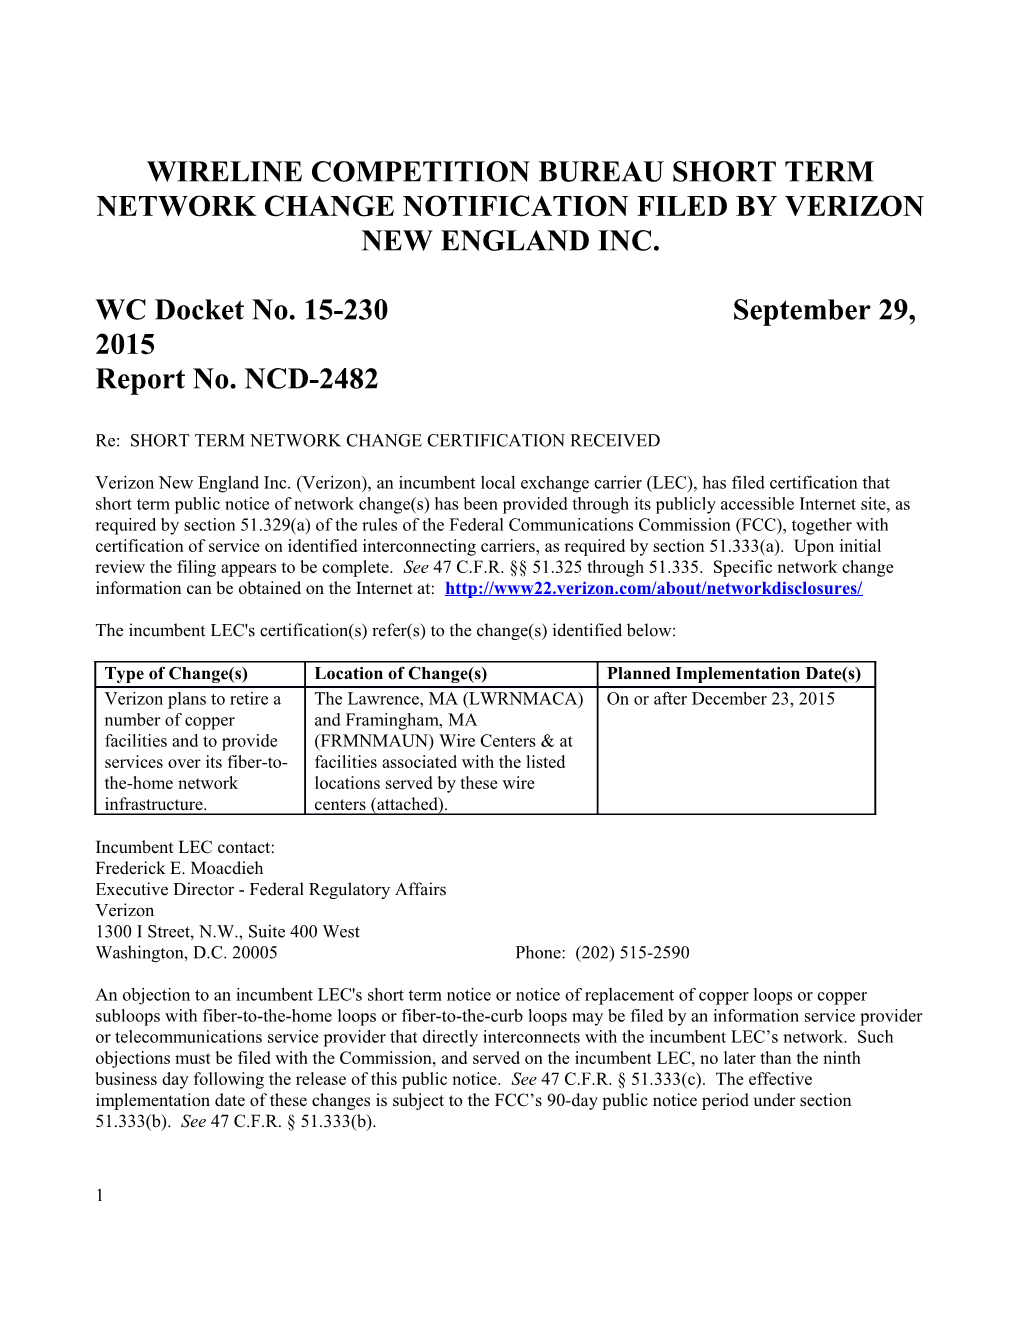 Wireline Competition Bureaushort Term Network Change Notificationfiled by Verizon New